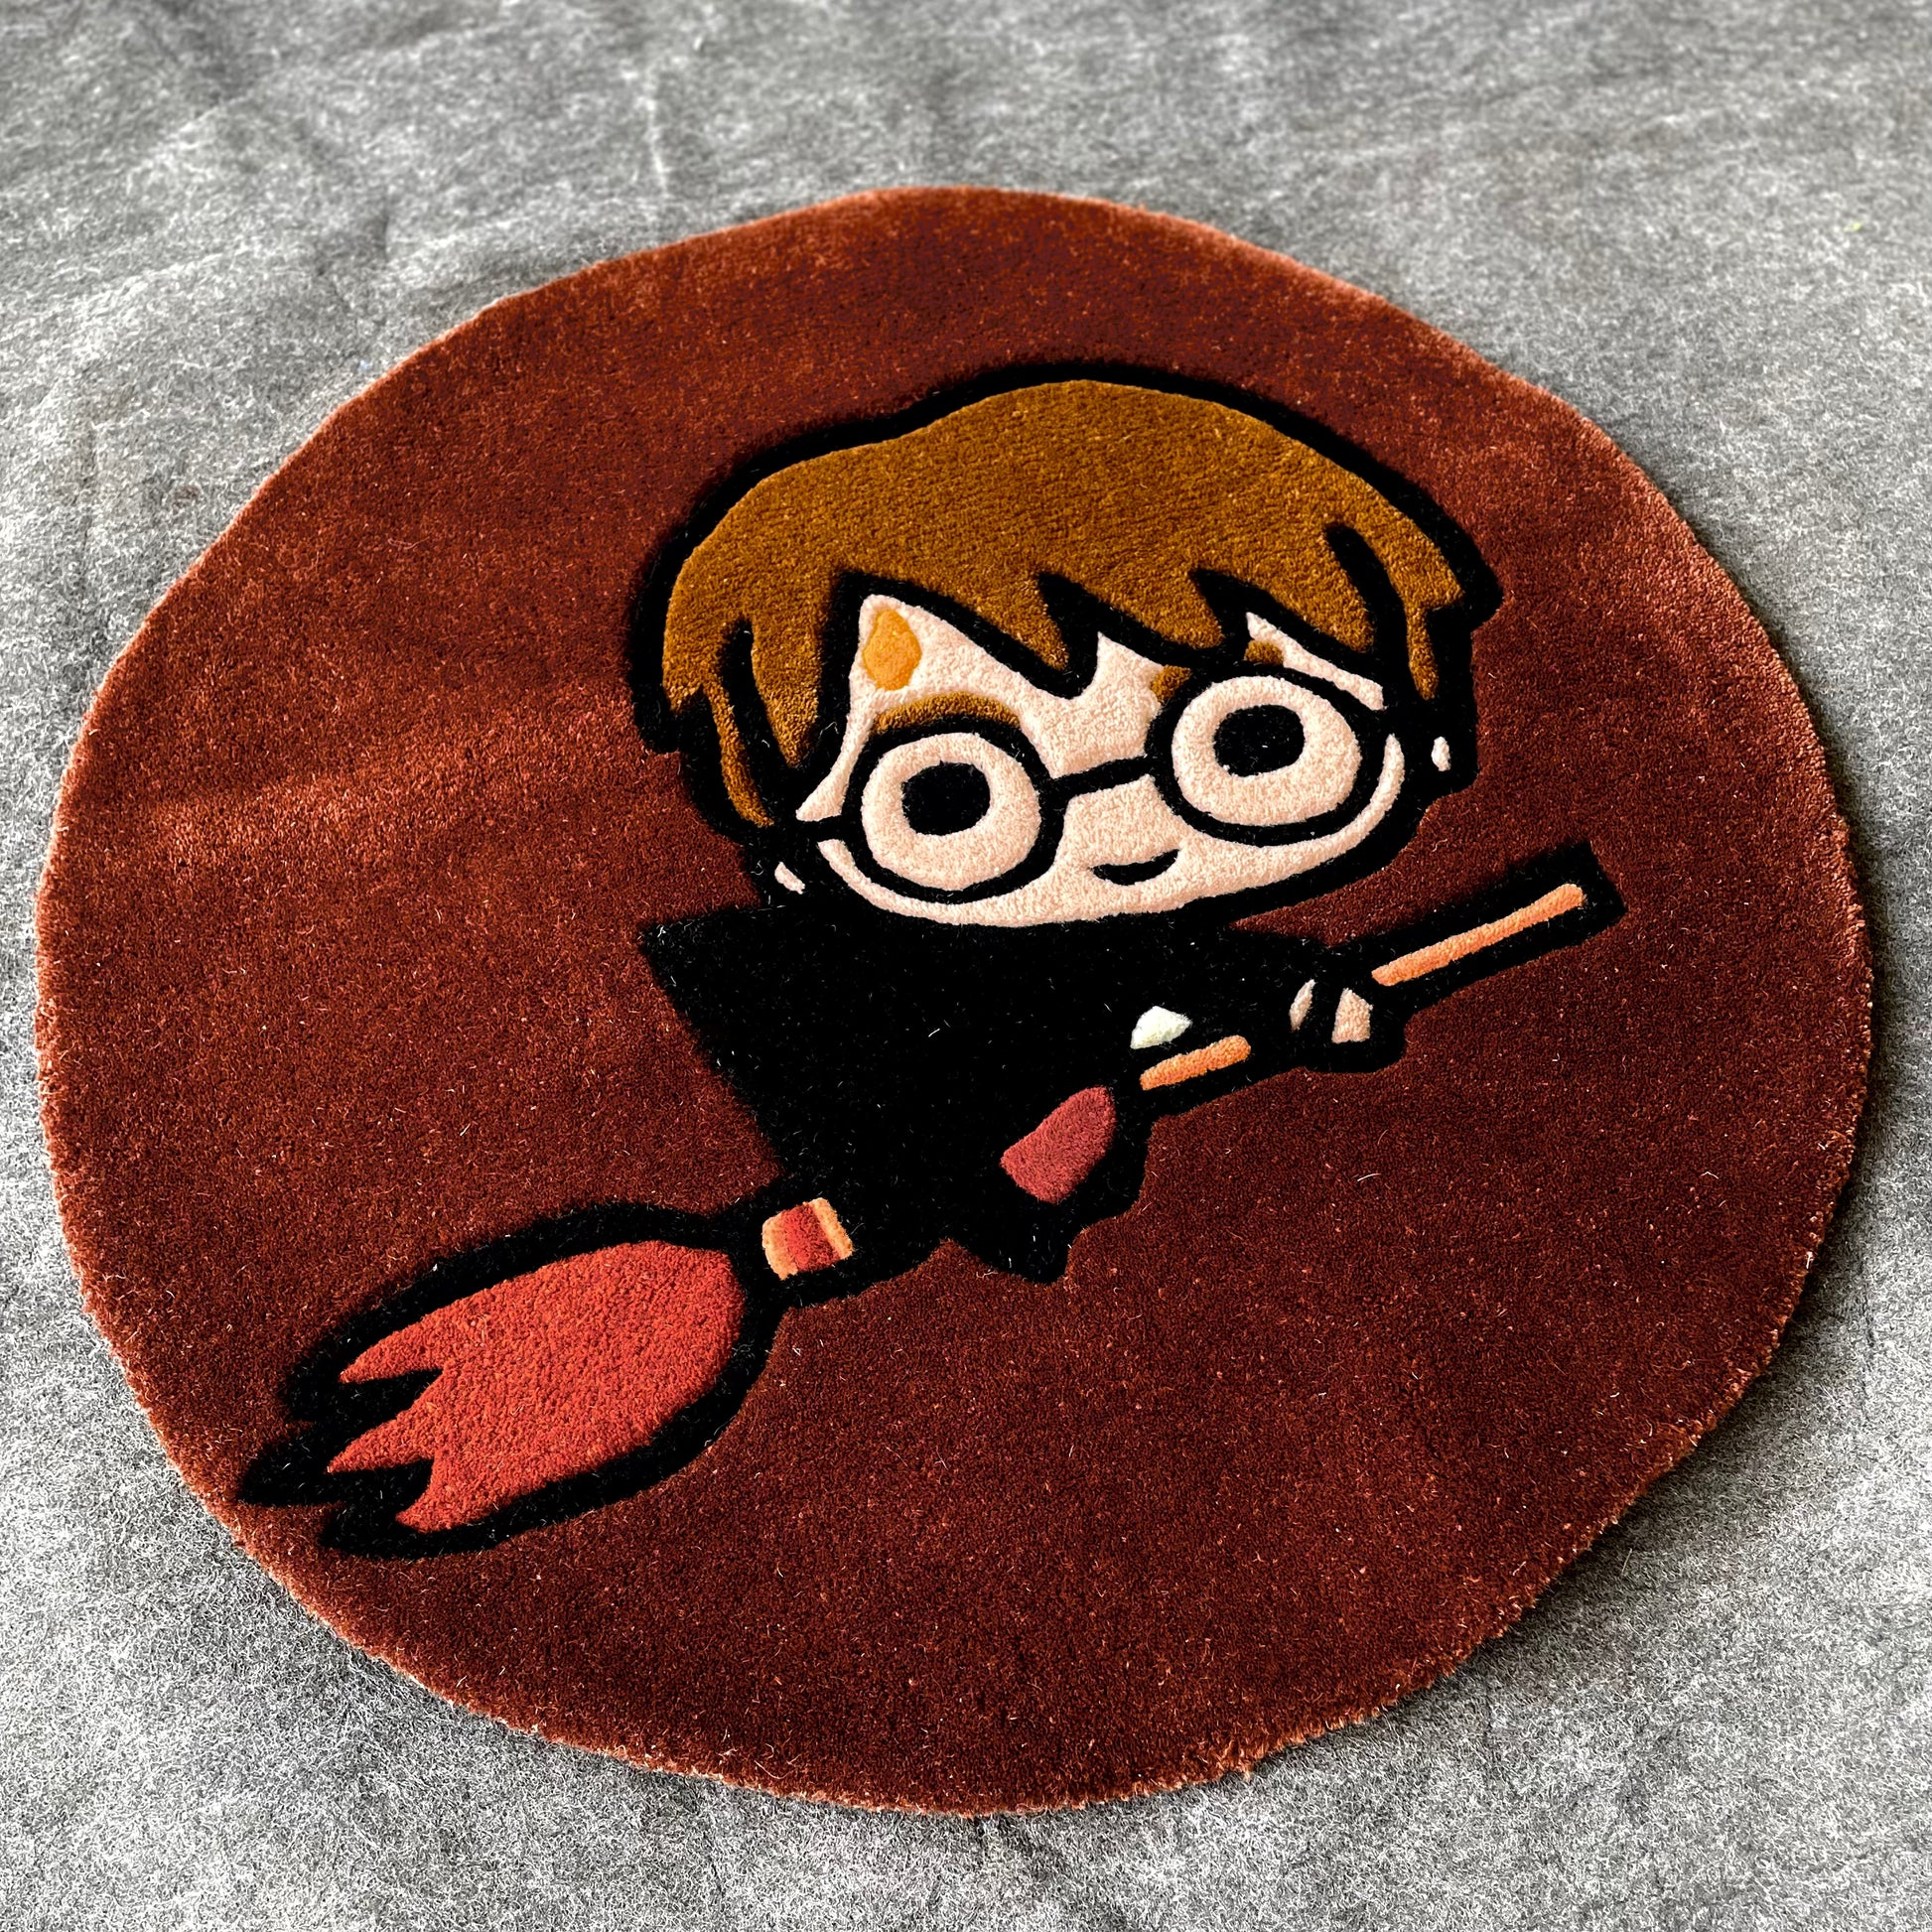 Harry Potter Round Hand-Tufted Rug side viewHarry Potter Round Hand-Tufted Rug side view